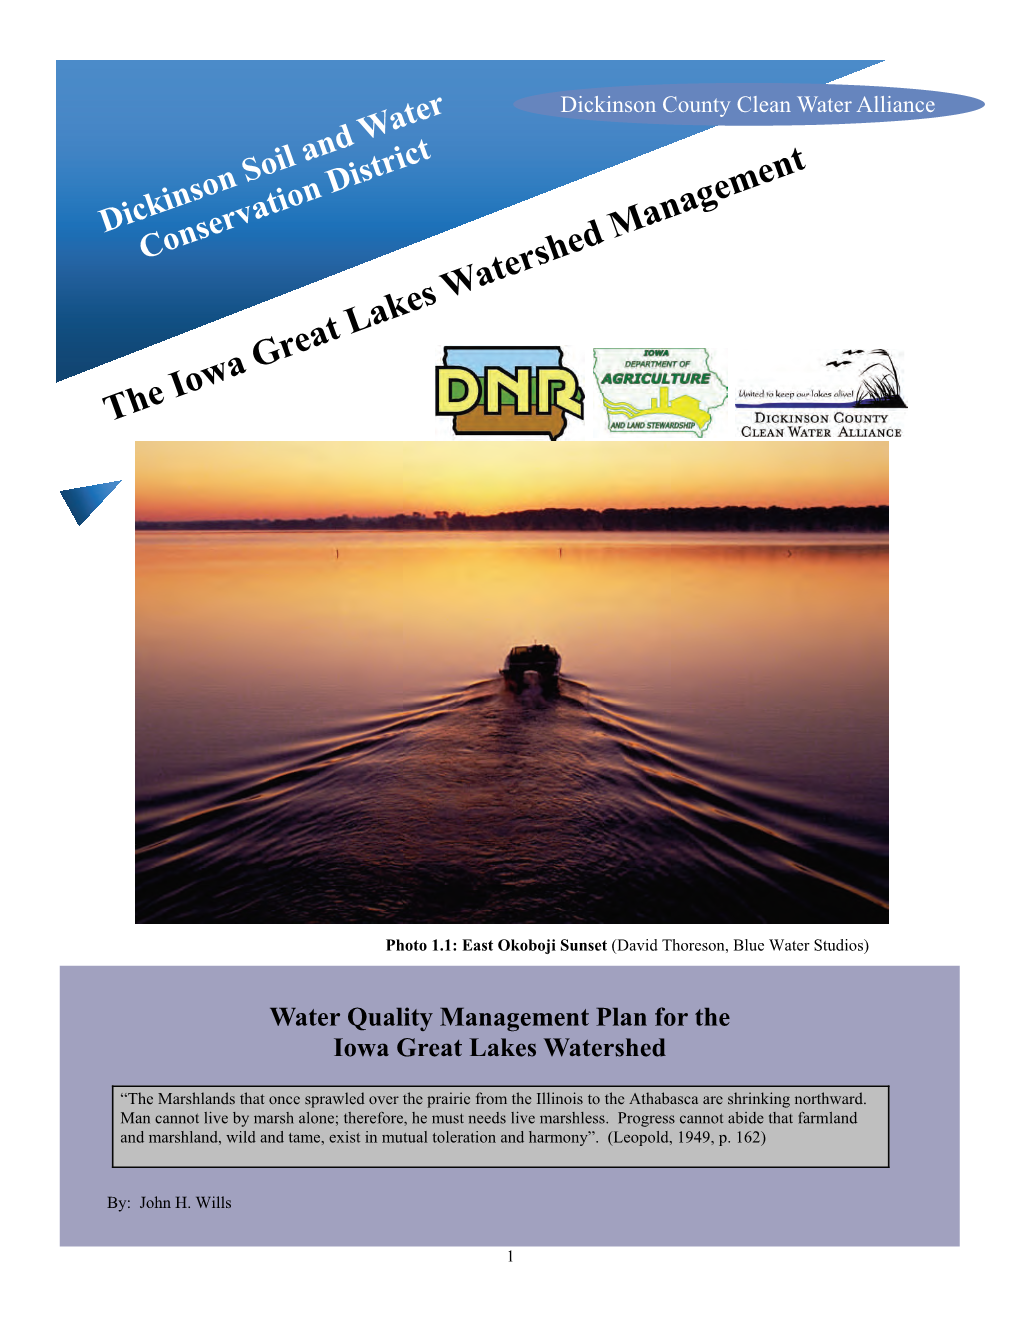 The Iowa Great Lakes Watershed Management